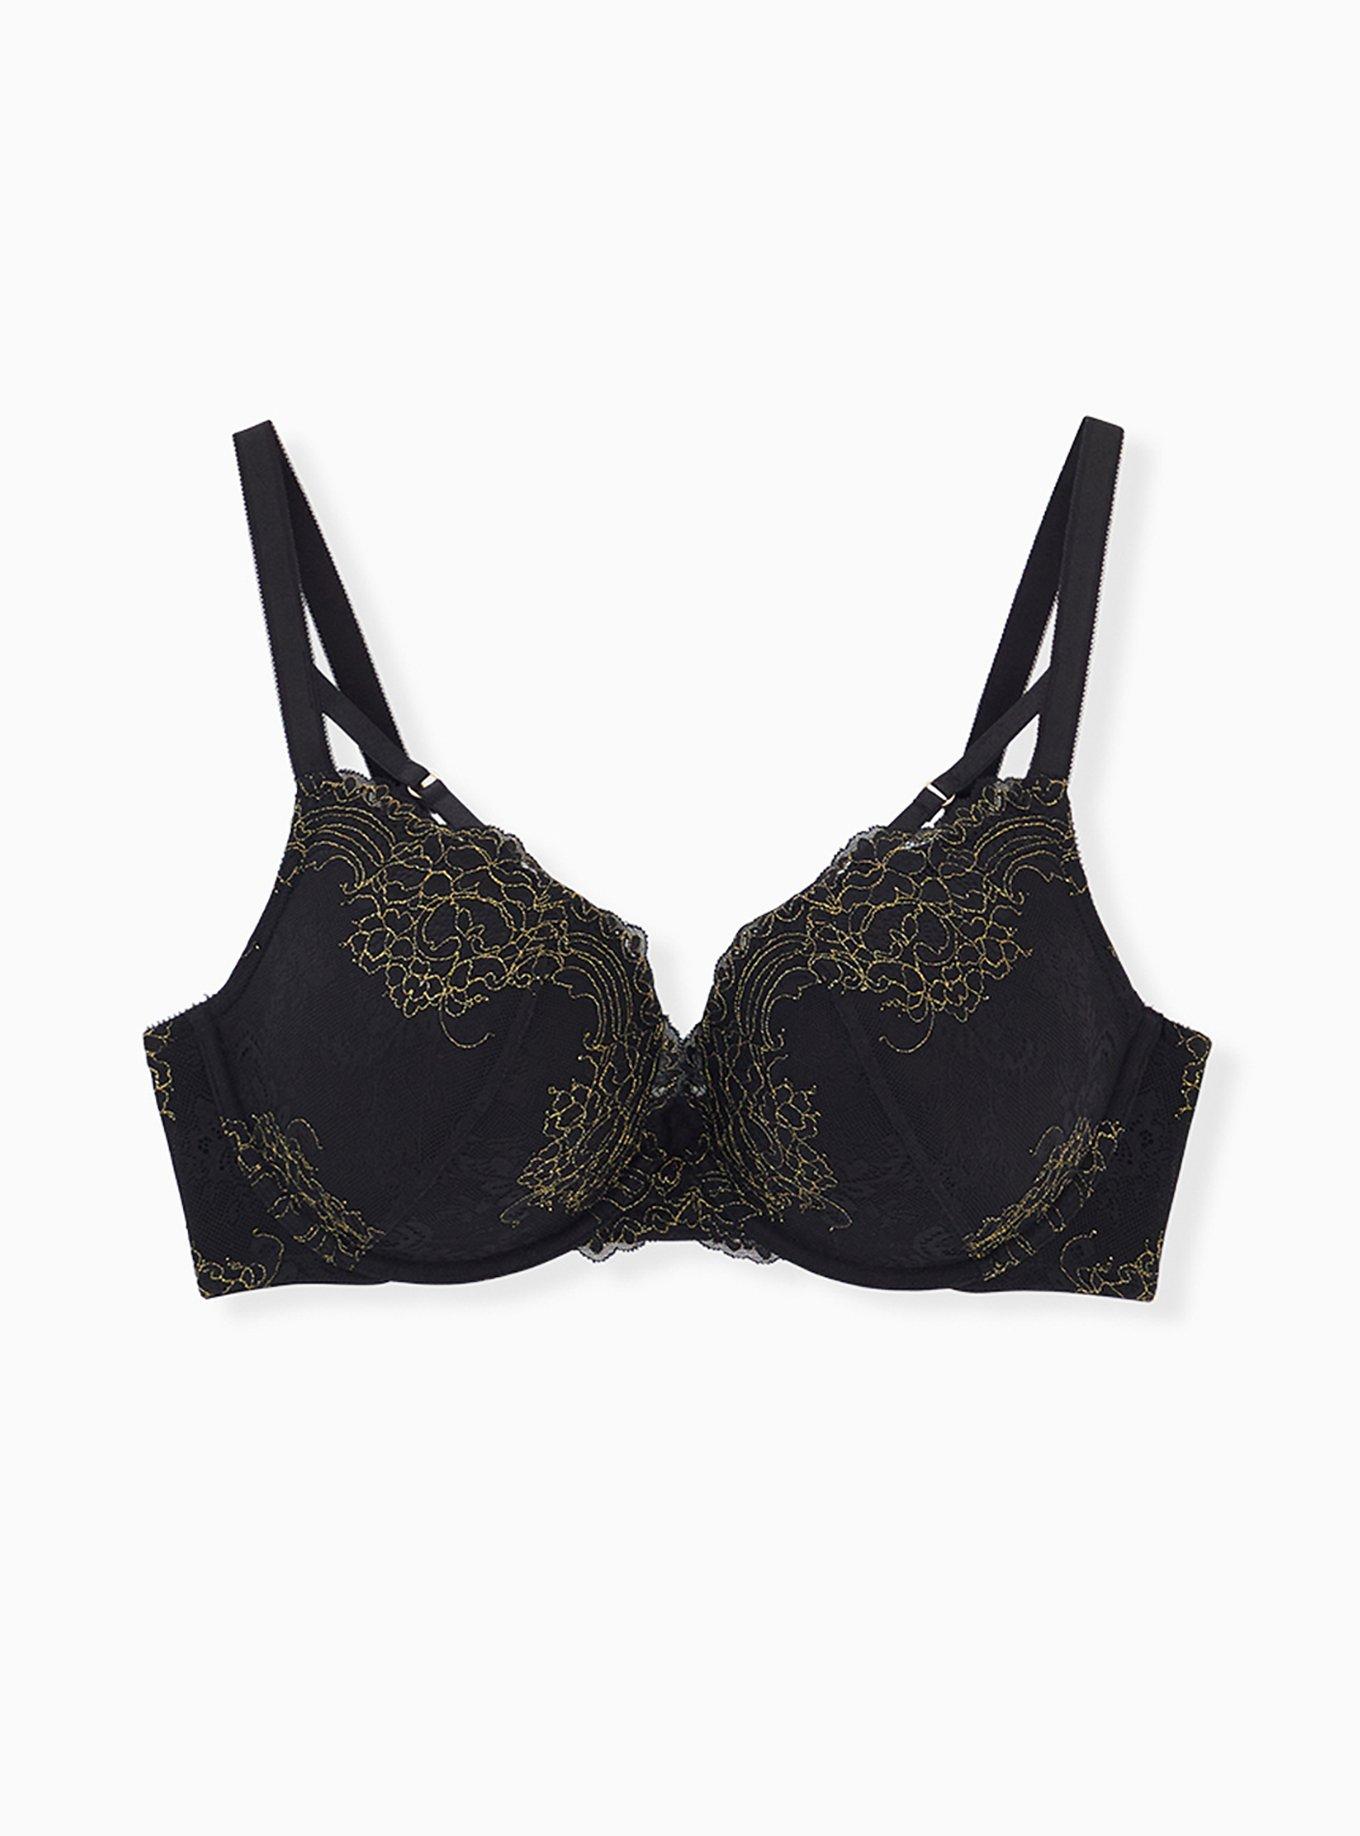 Torrid Lace Plunge Push-up Bra Blue and Black 46C Size undefined - $26 -  From Katrina